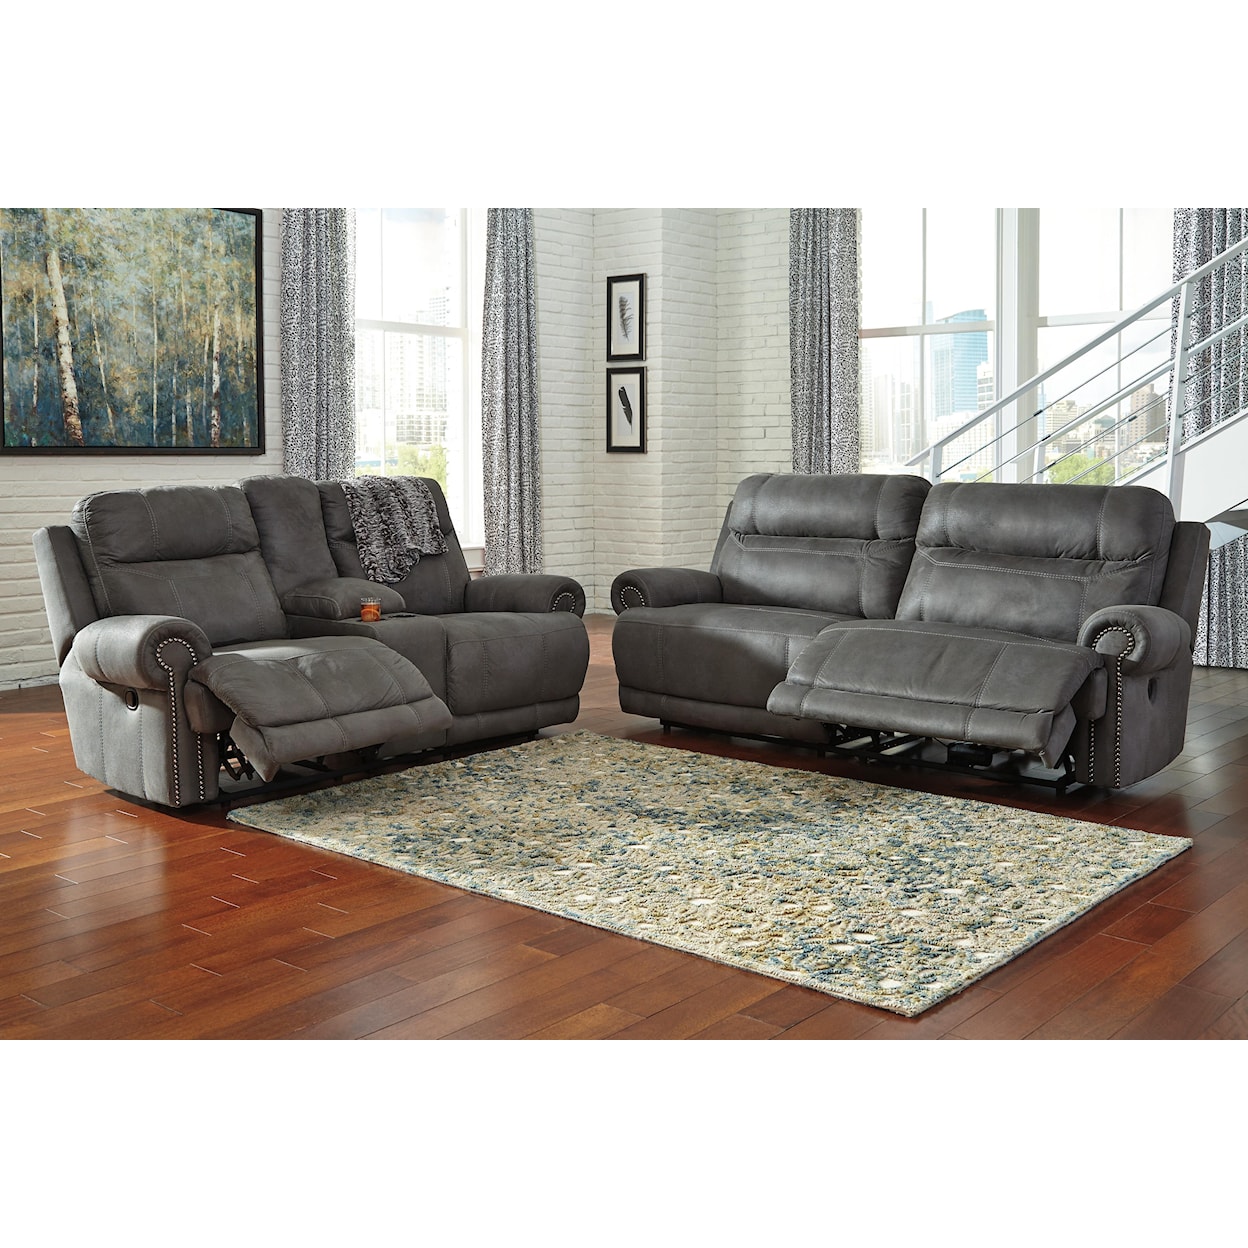 Signature Design by Ashley Austere 2 Seat Reclining Sofa